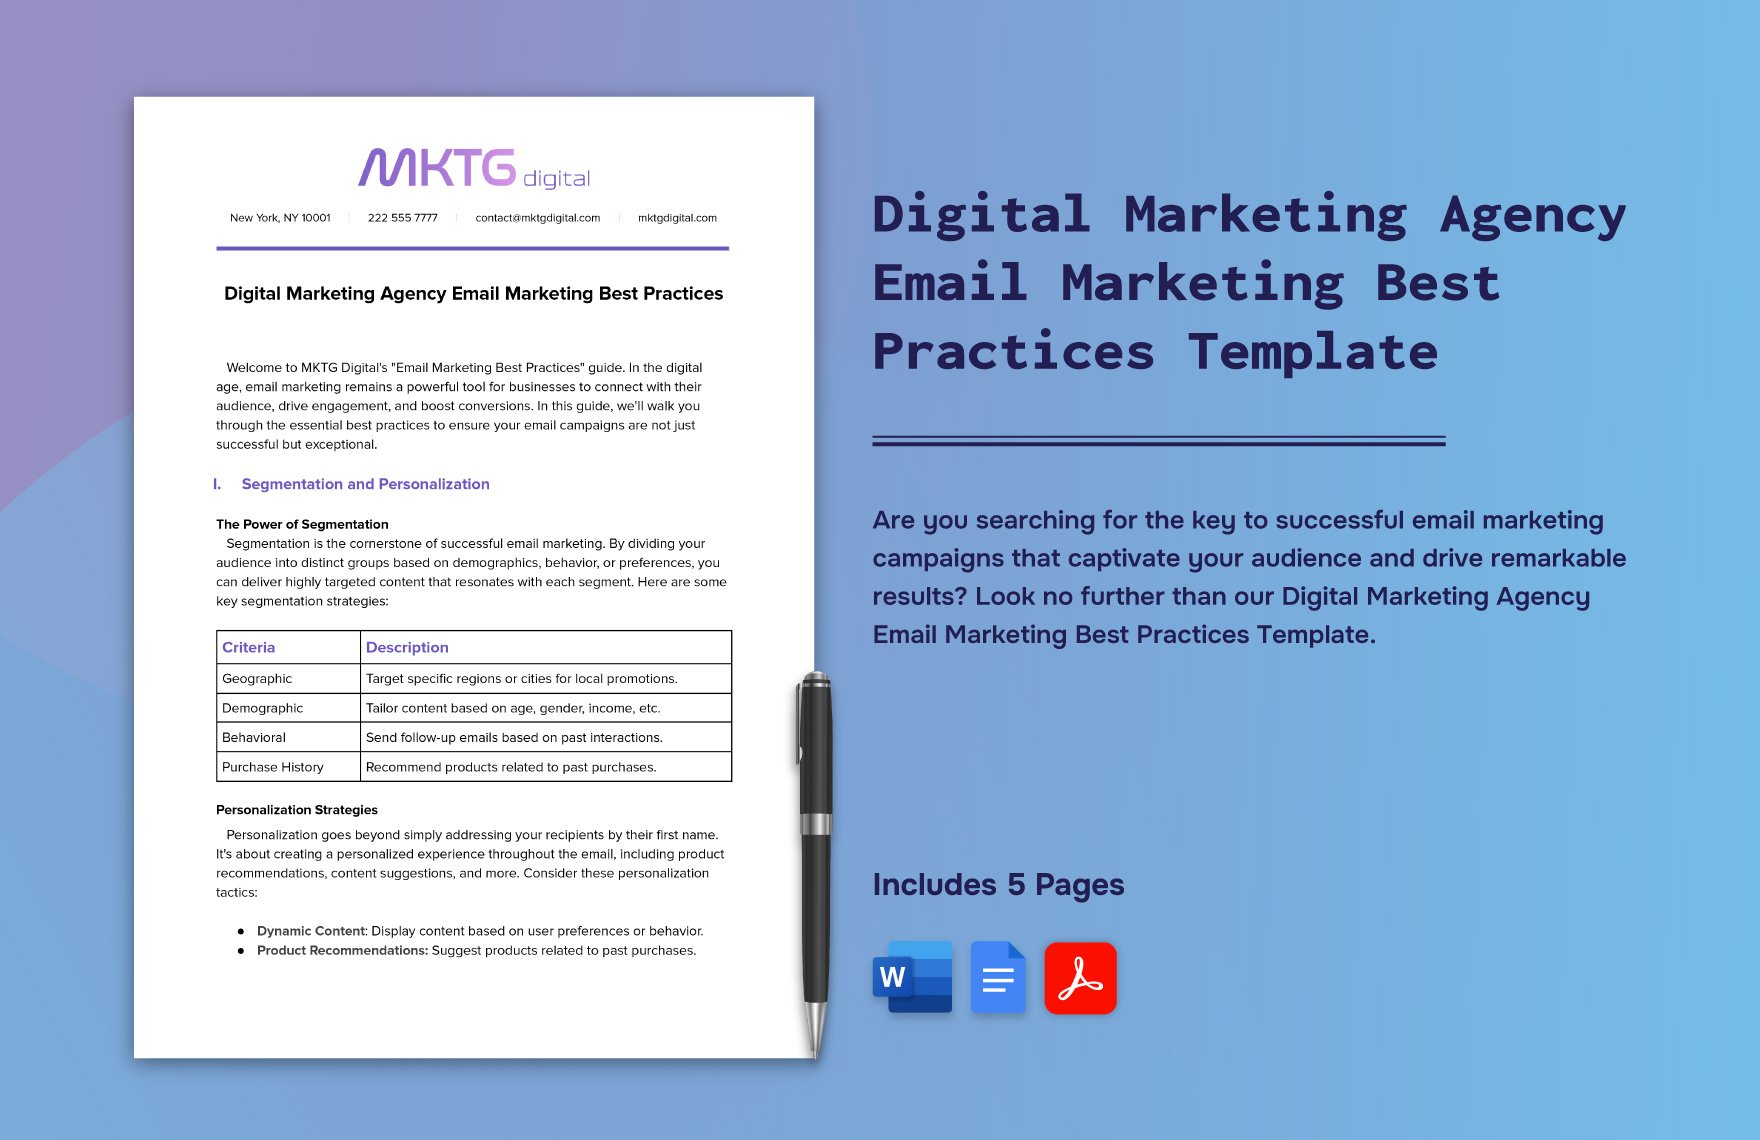 Digital Marketing Agency Email Marketing Best Practices Template